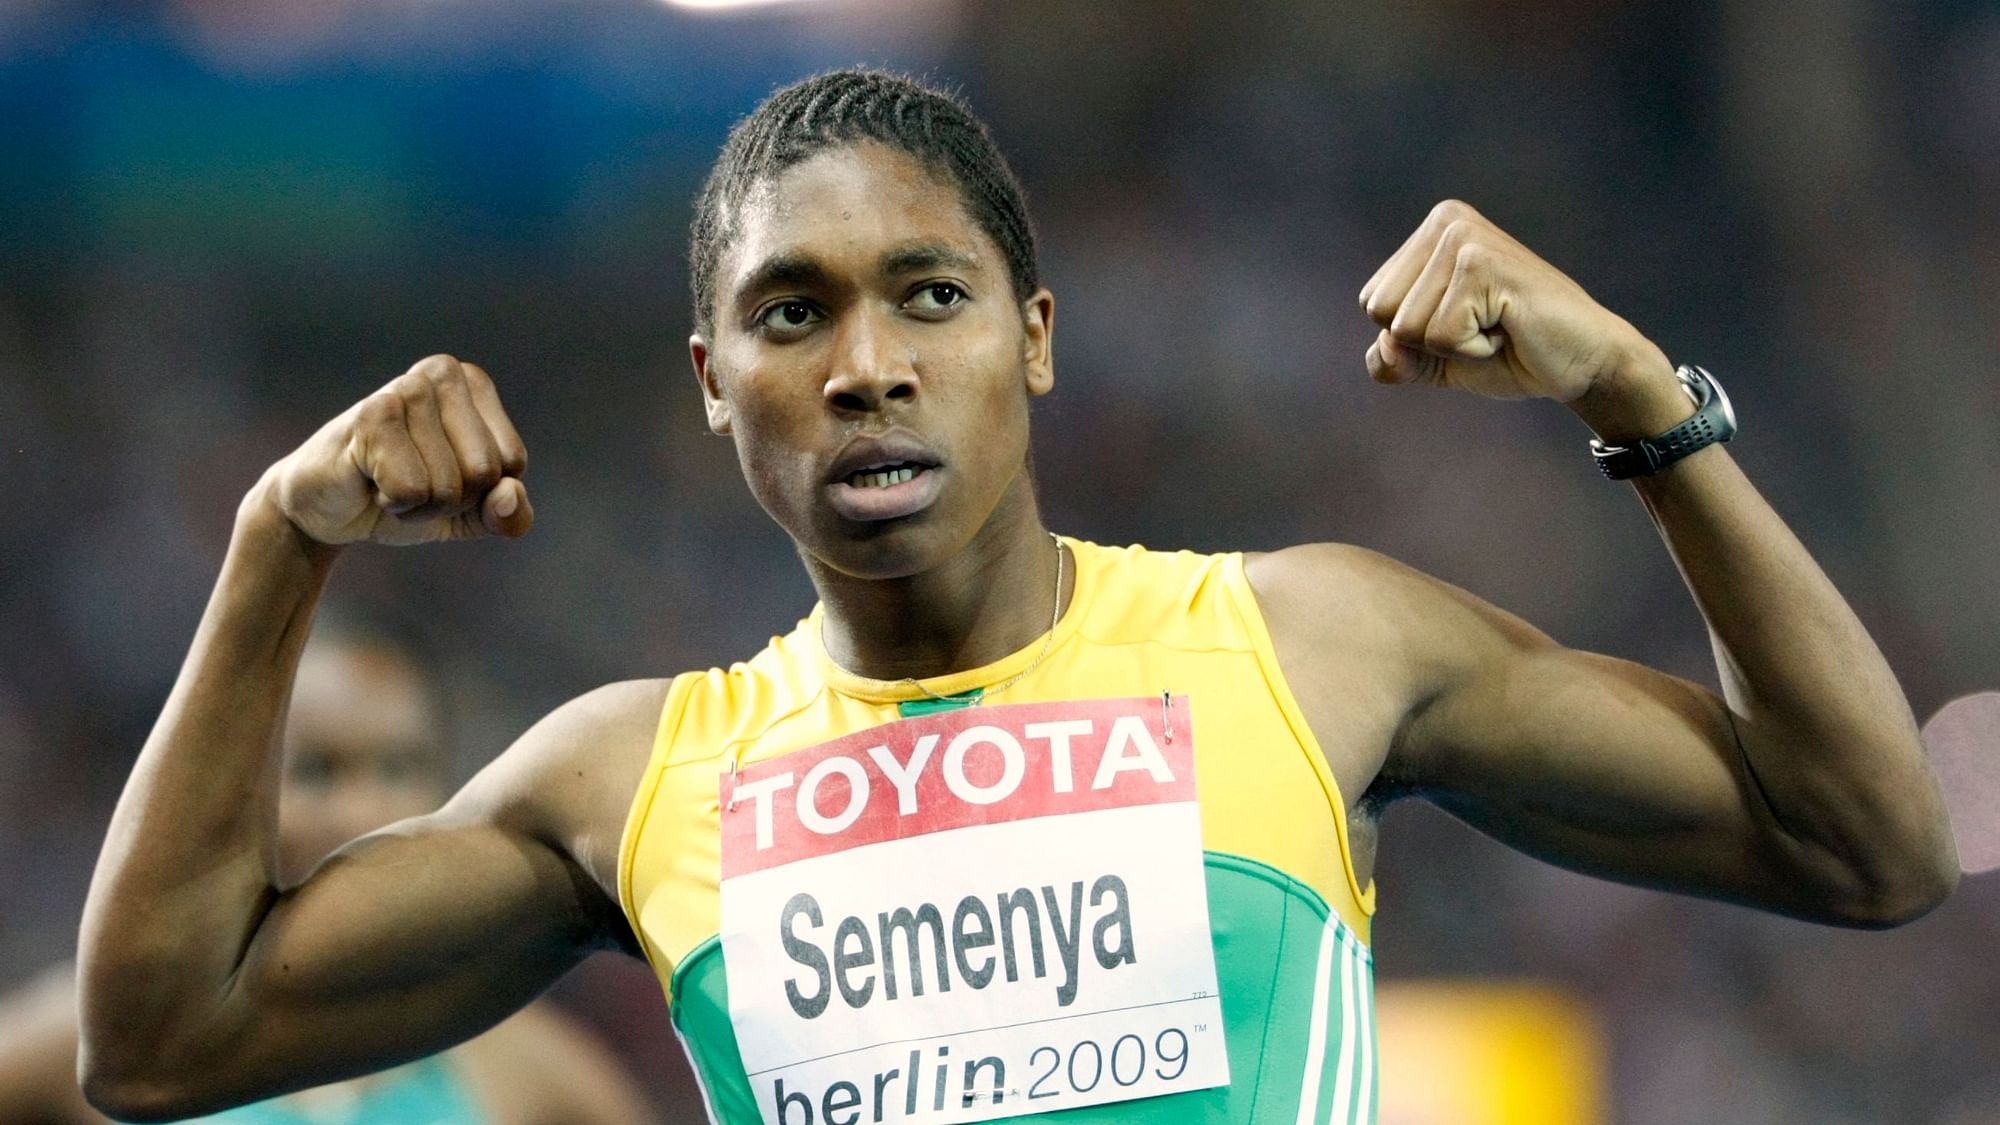 Caster Semenya had lost her appeal against new rules that force her to medicate to suppress her testosterone levels.